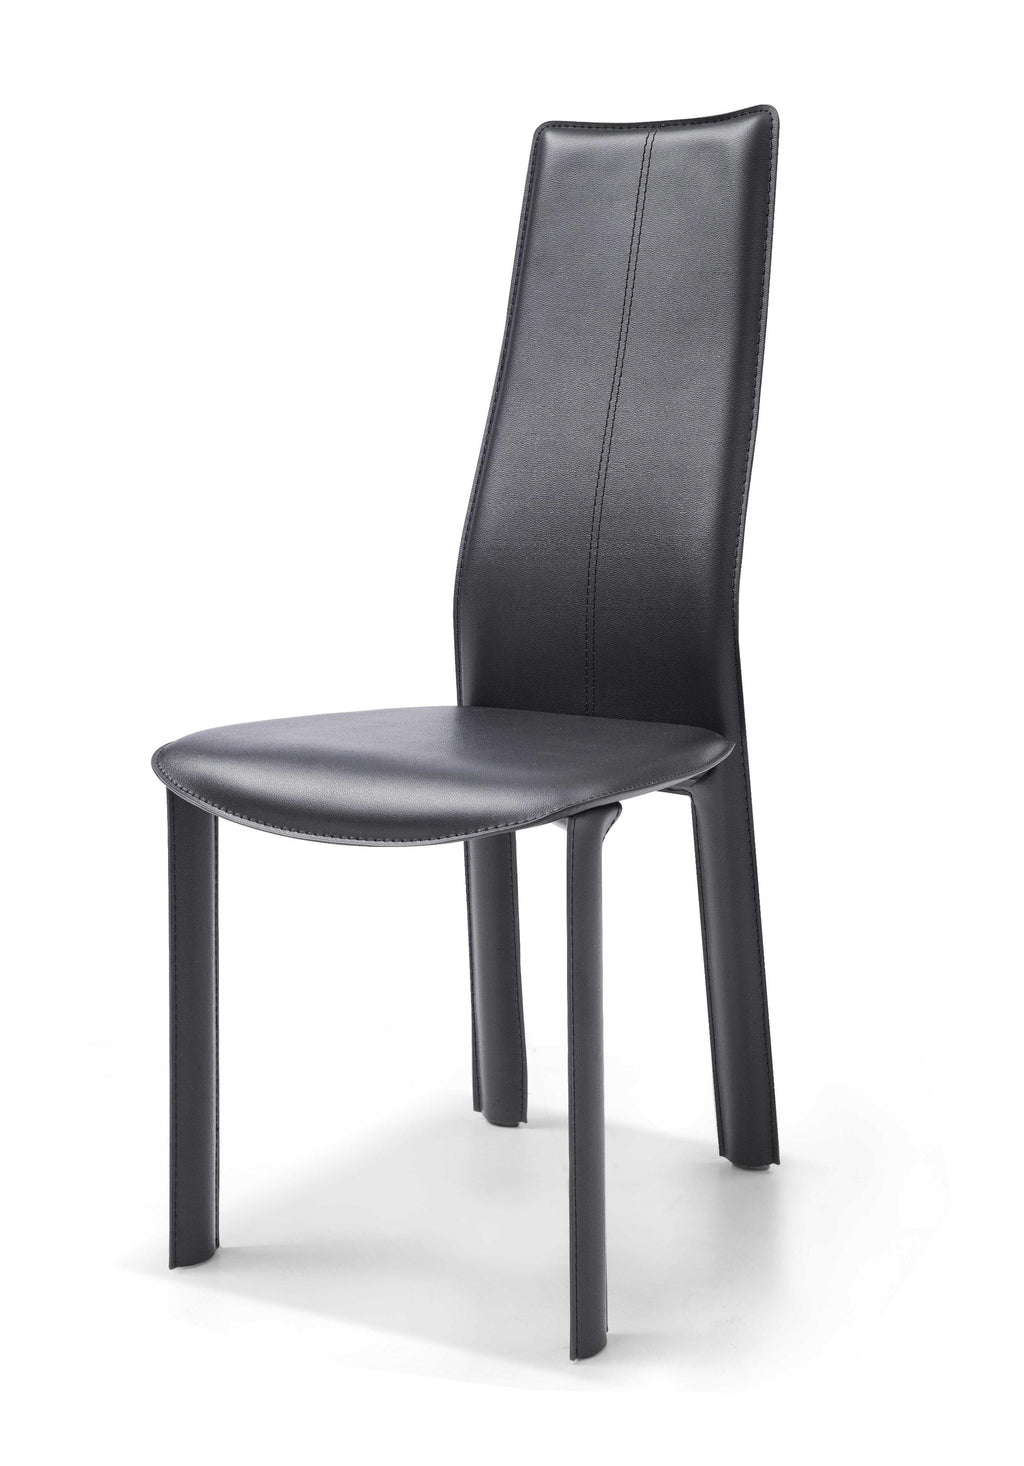 Set Of 4 Modern Dining Black Faux Leather Dining Chairs - 99fab 